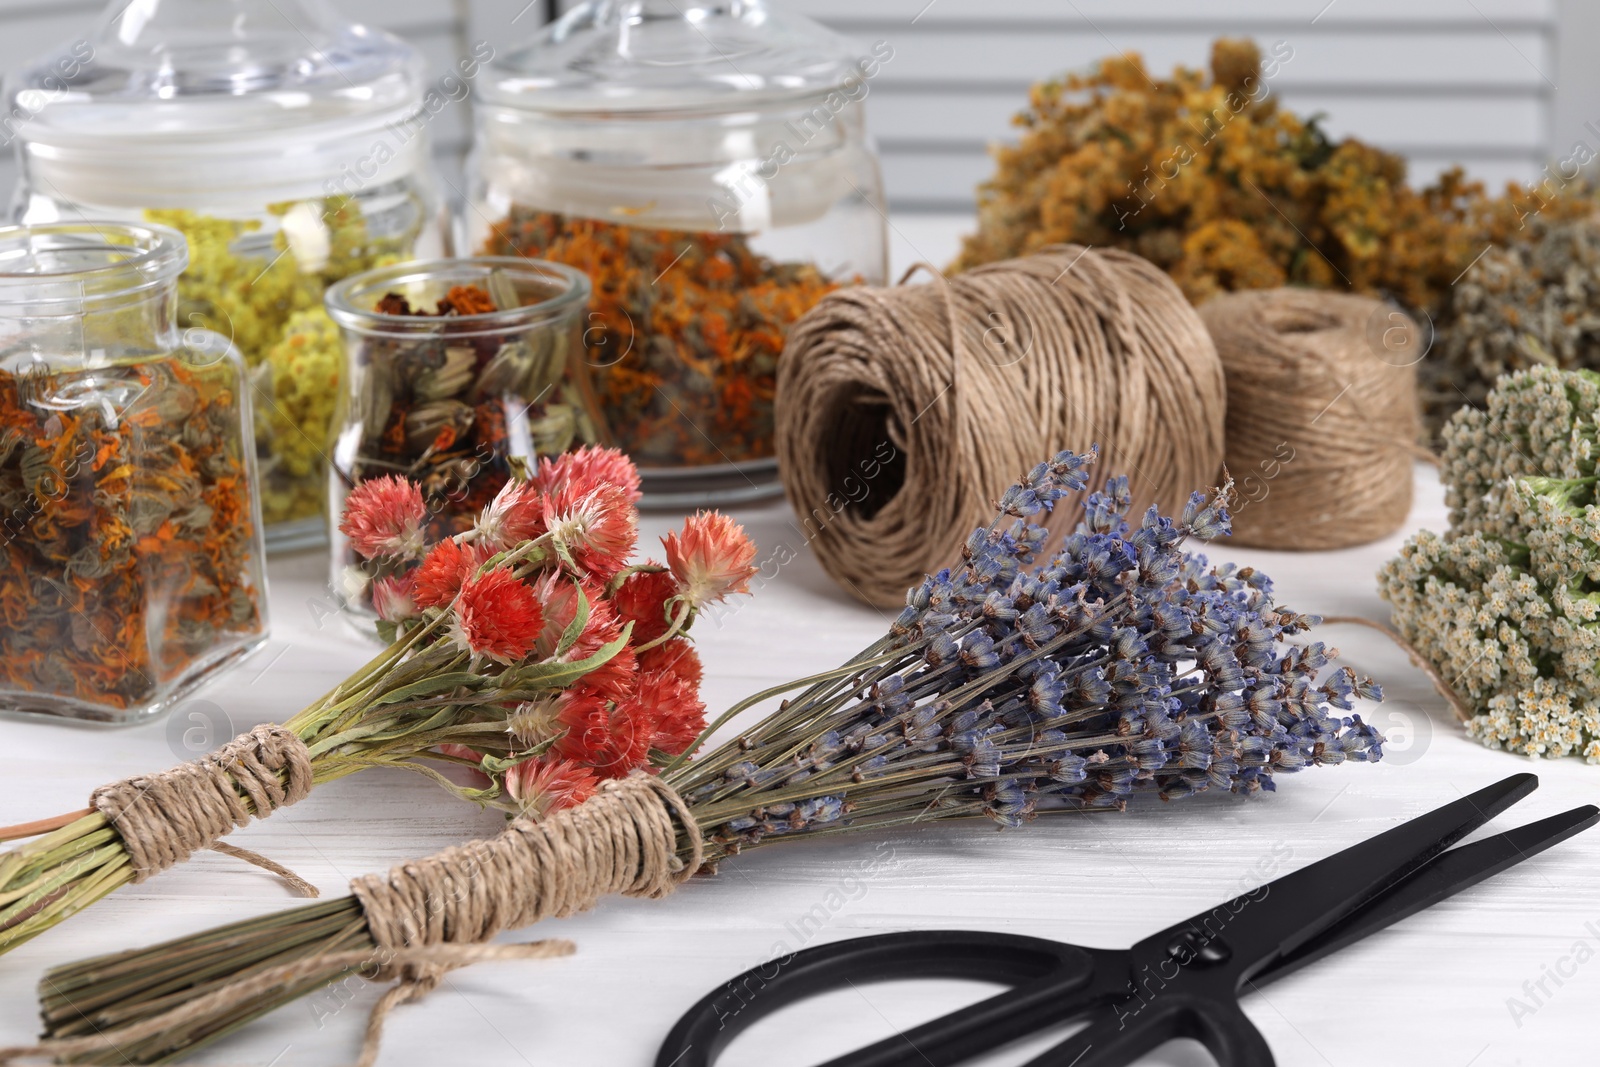 Photo of Bunches of dry flowers, different medicinal herbs, scissors and spools on white wooden table